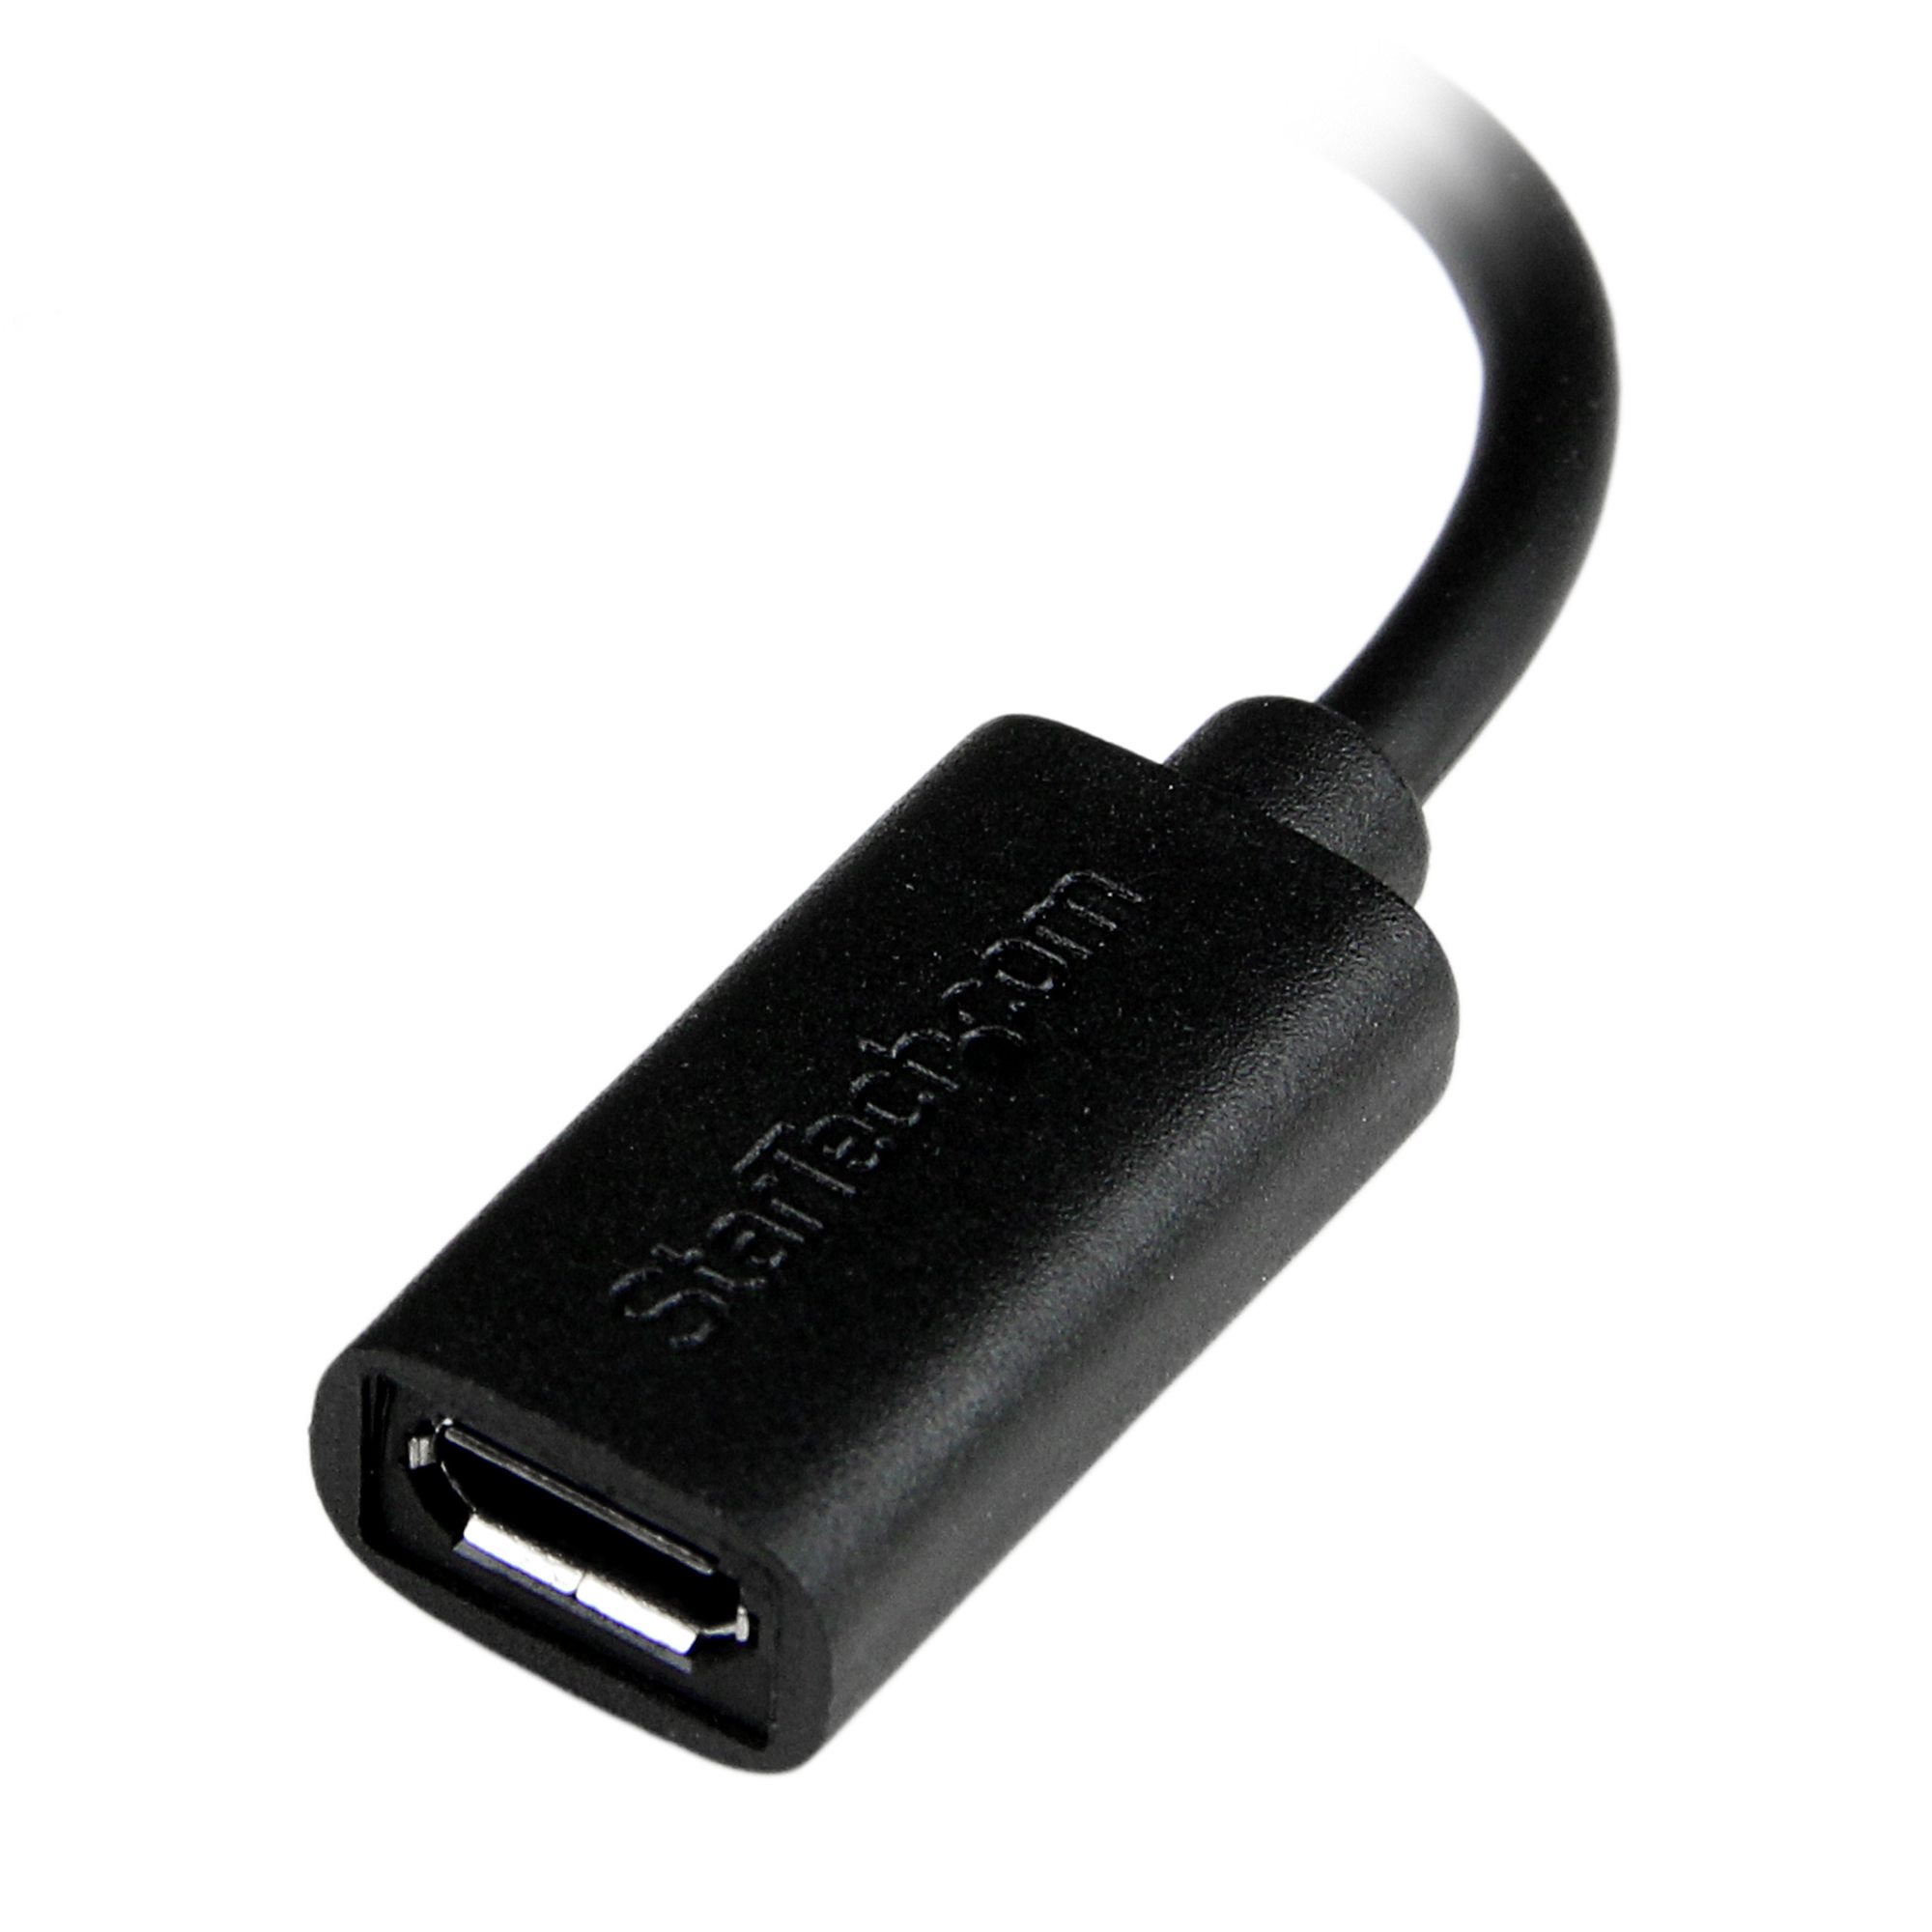 ADAPTATEUR APPLE LIGHTNING VERS MICRO USB. - DLH Power - Chargeurs